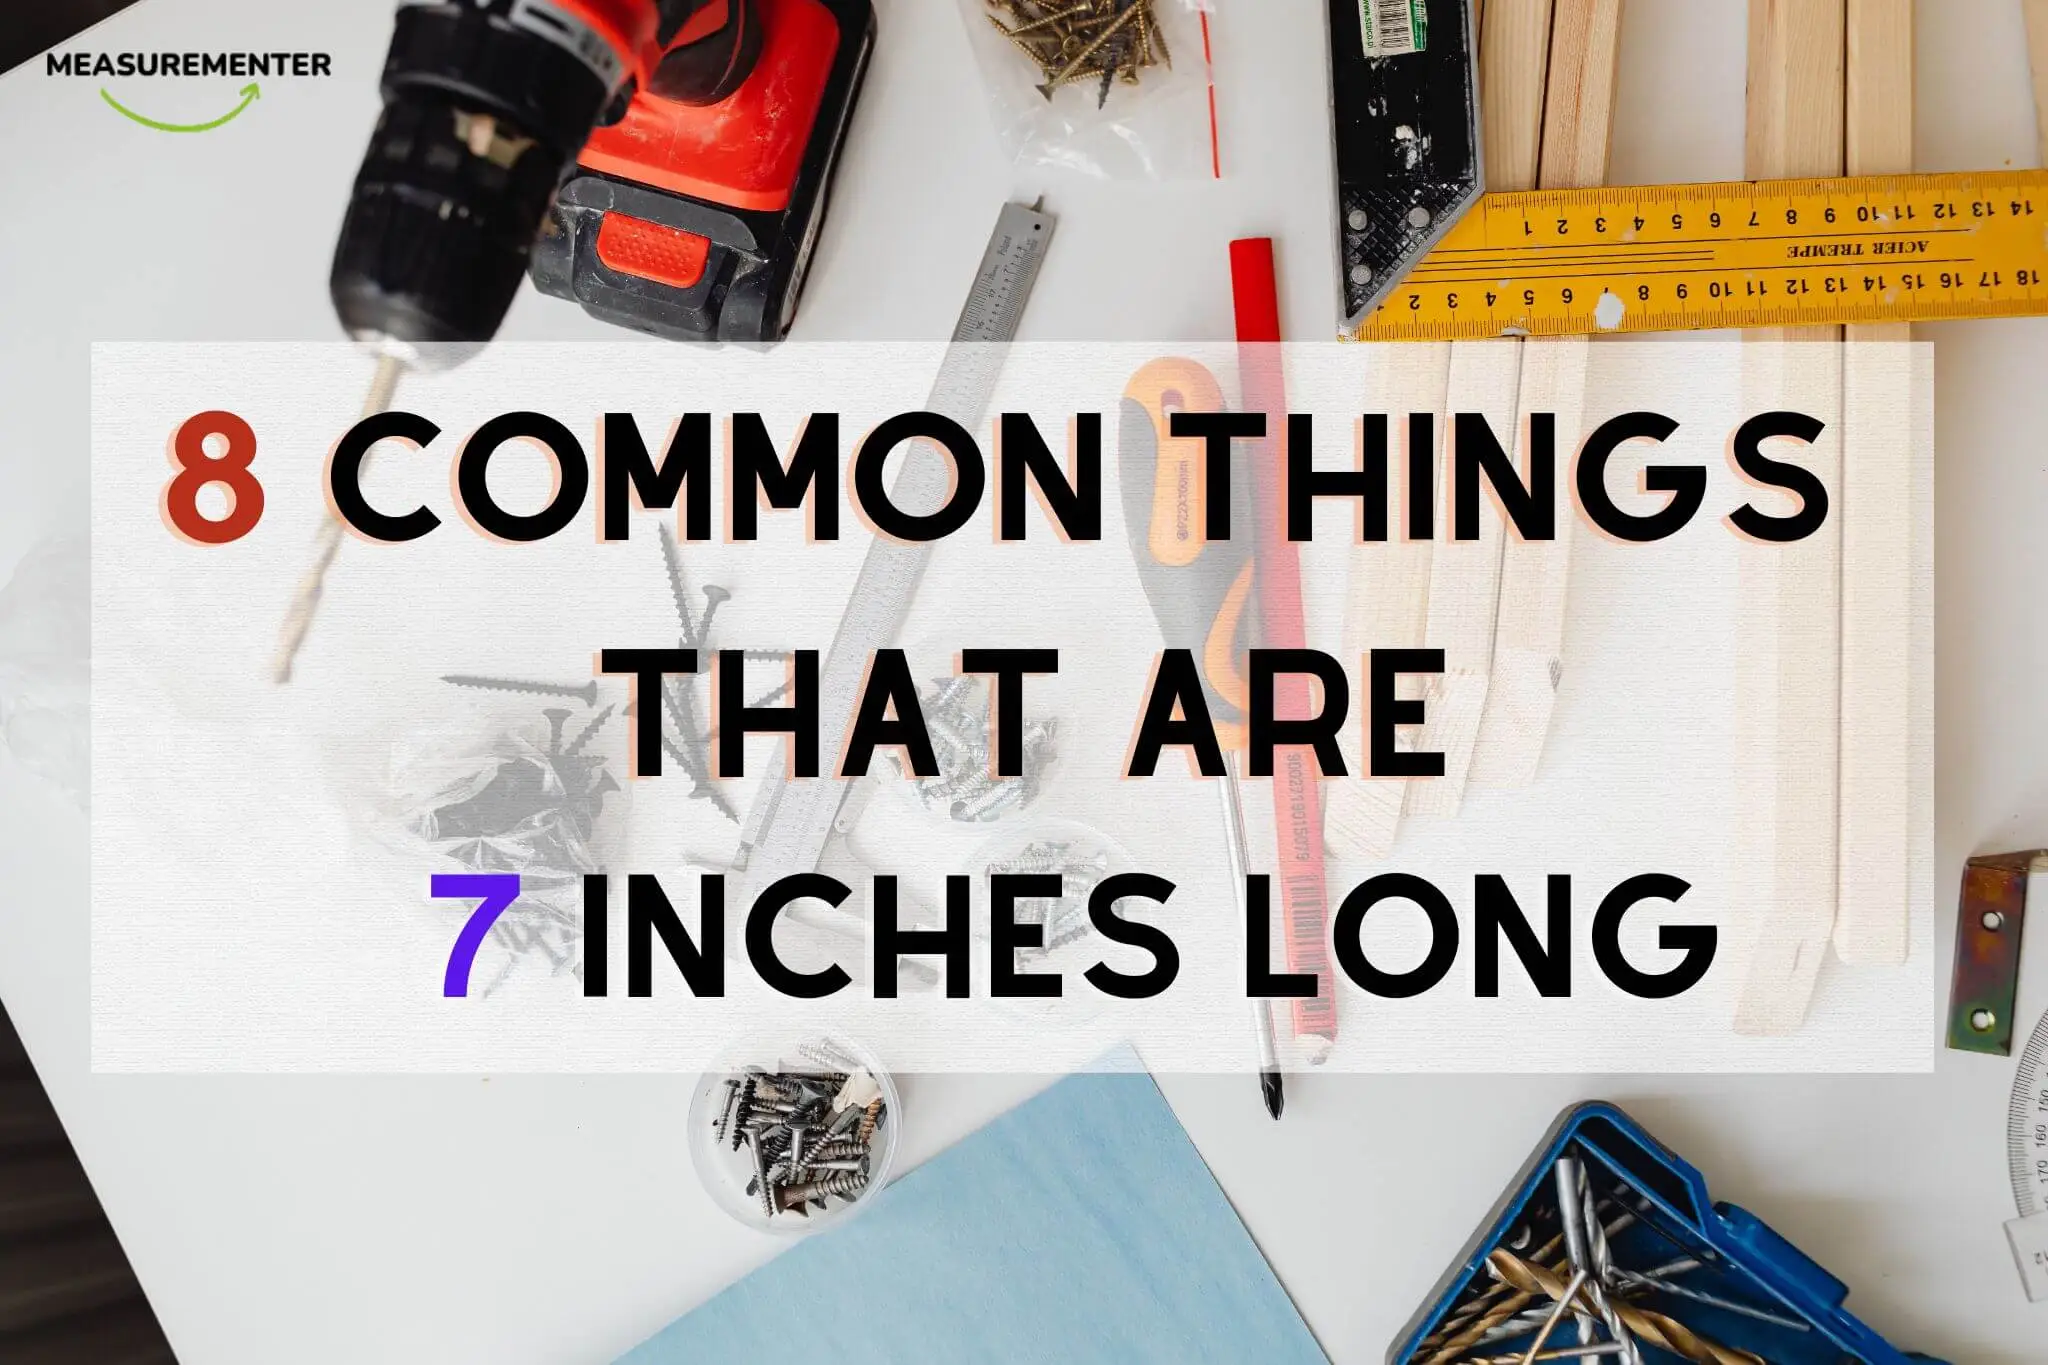 8 Common things that are 7 Inches long. How long is 7 inches?